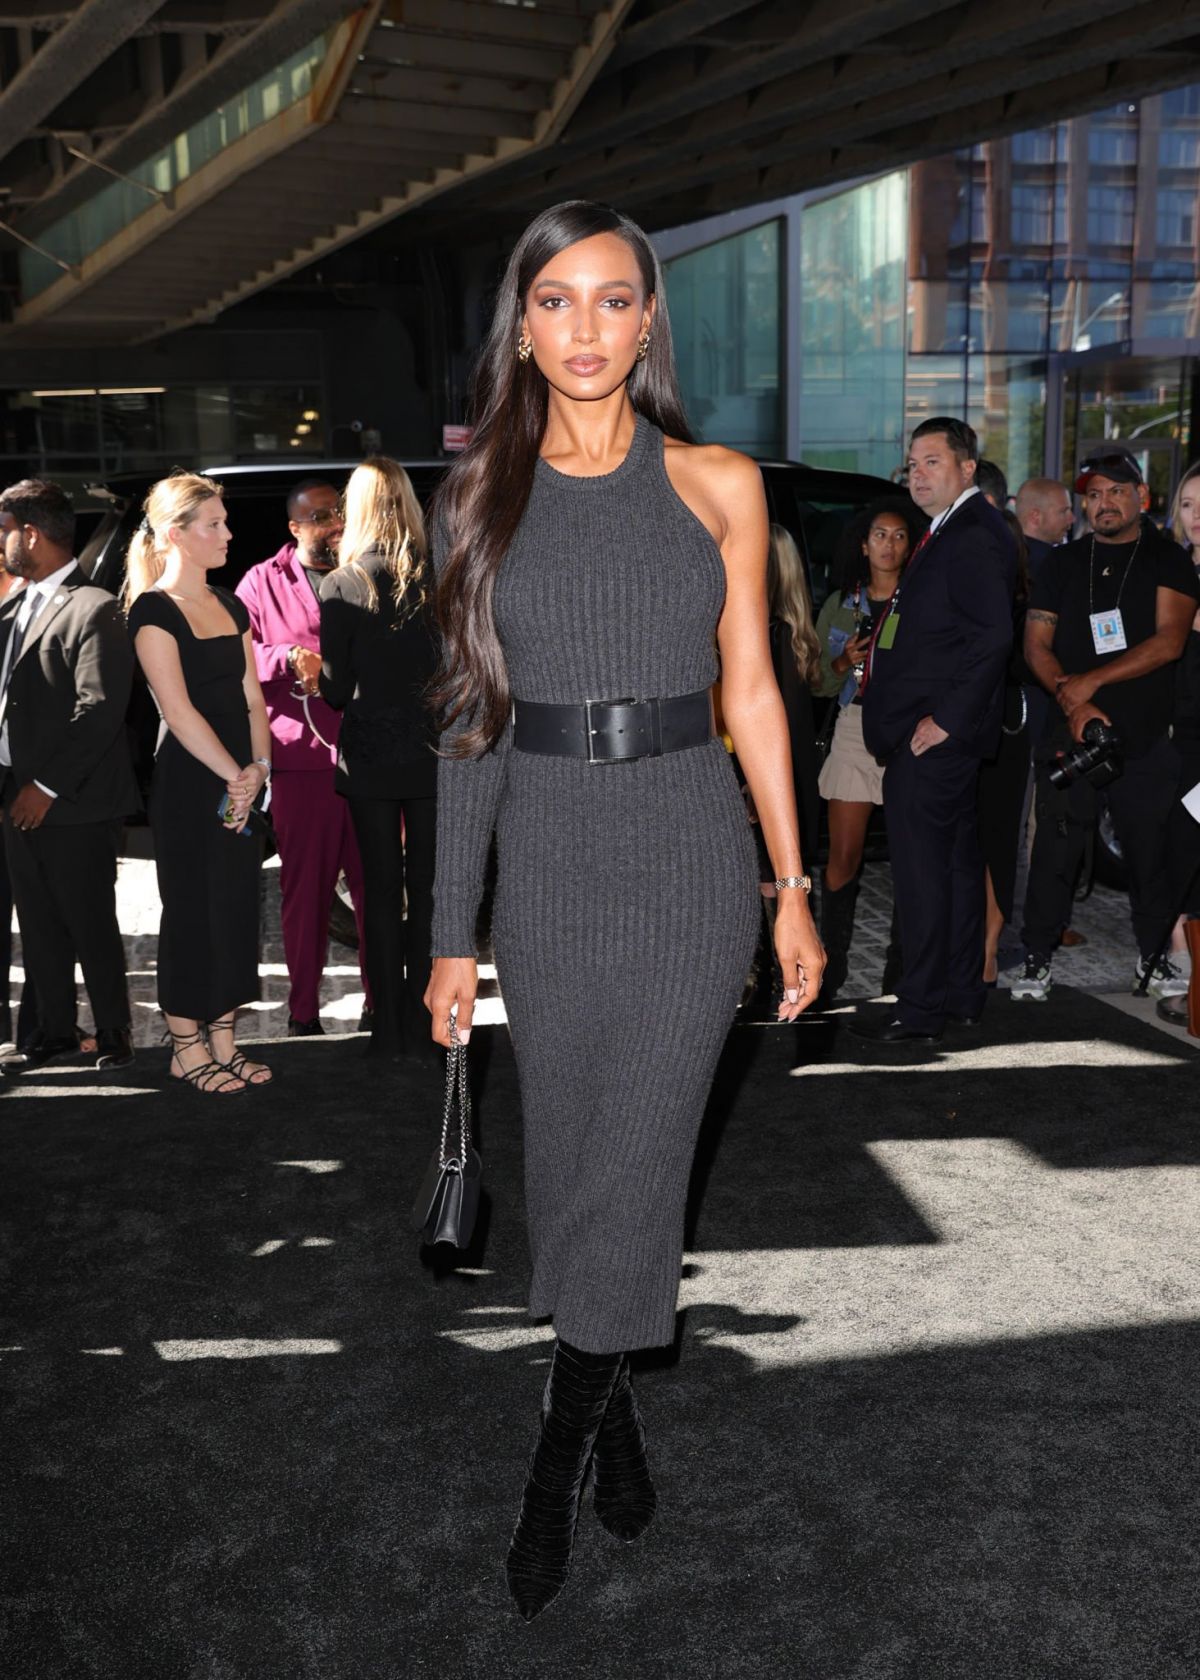 Jasmine Tookes attends Michael Kors Fashion Show at NYFW in New York, Sep 2022